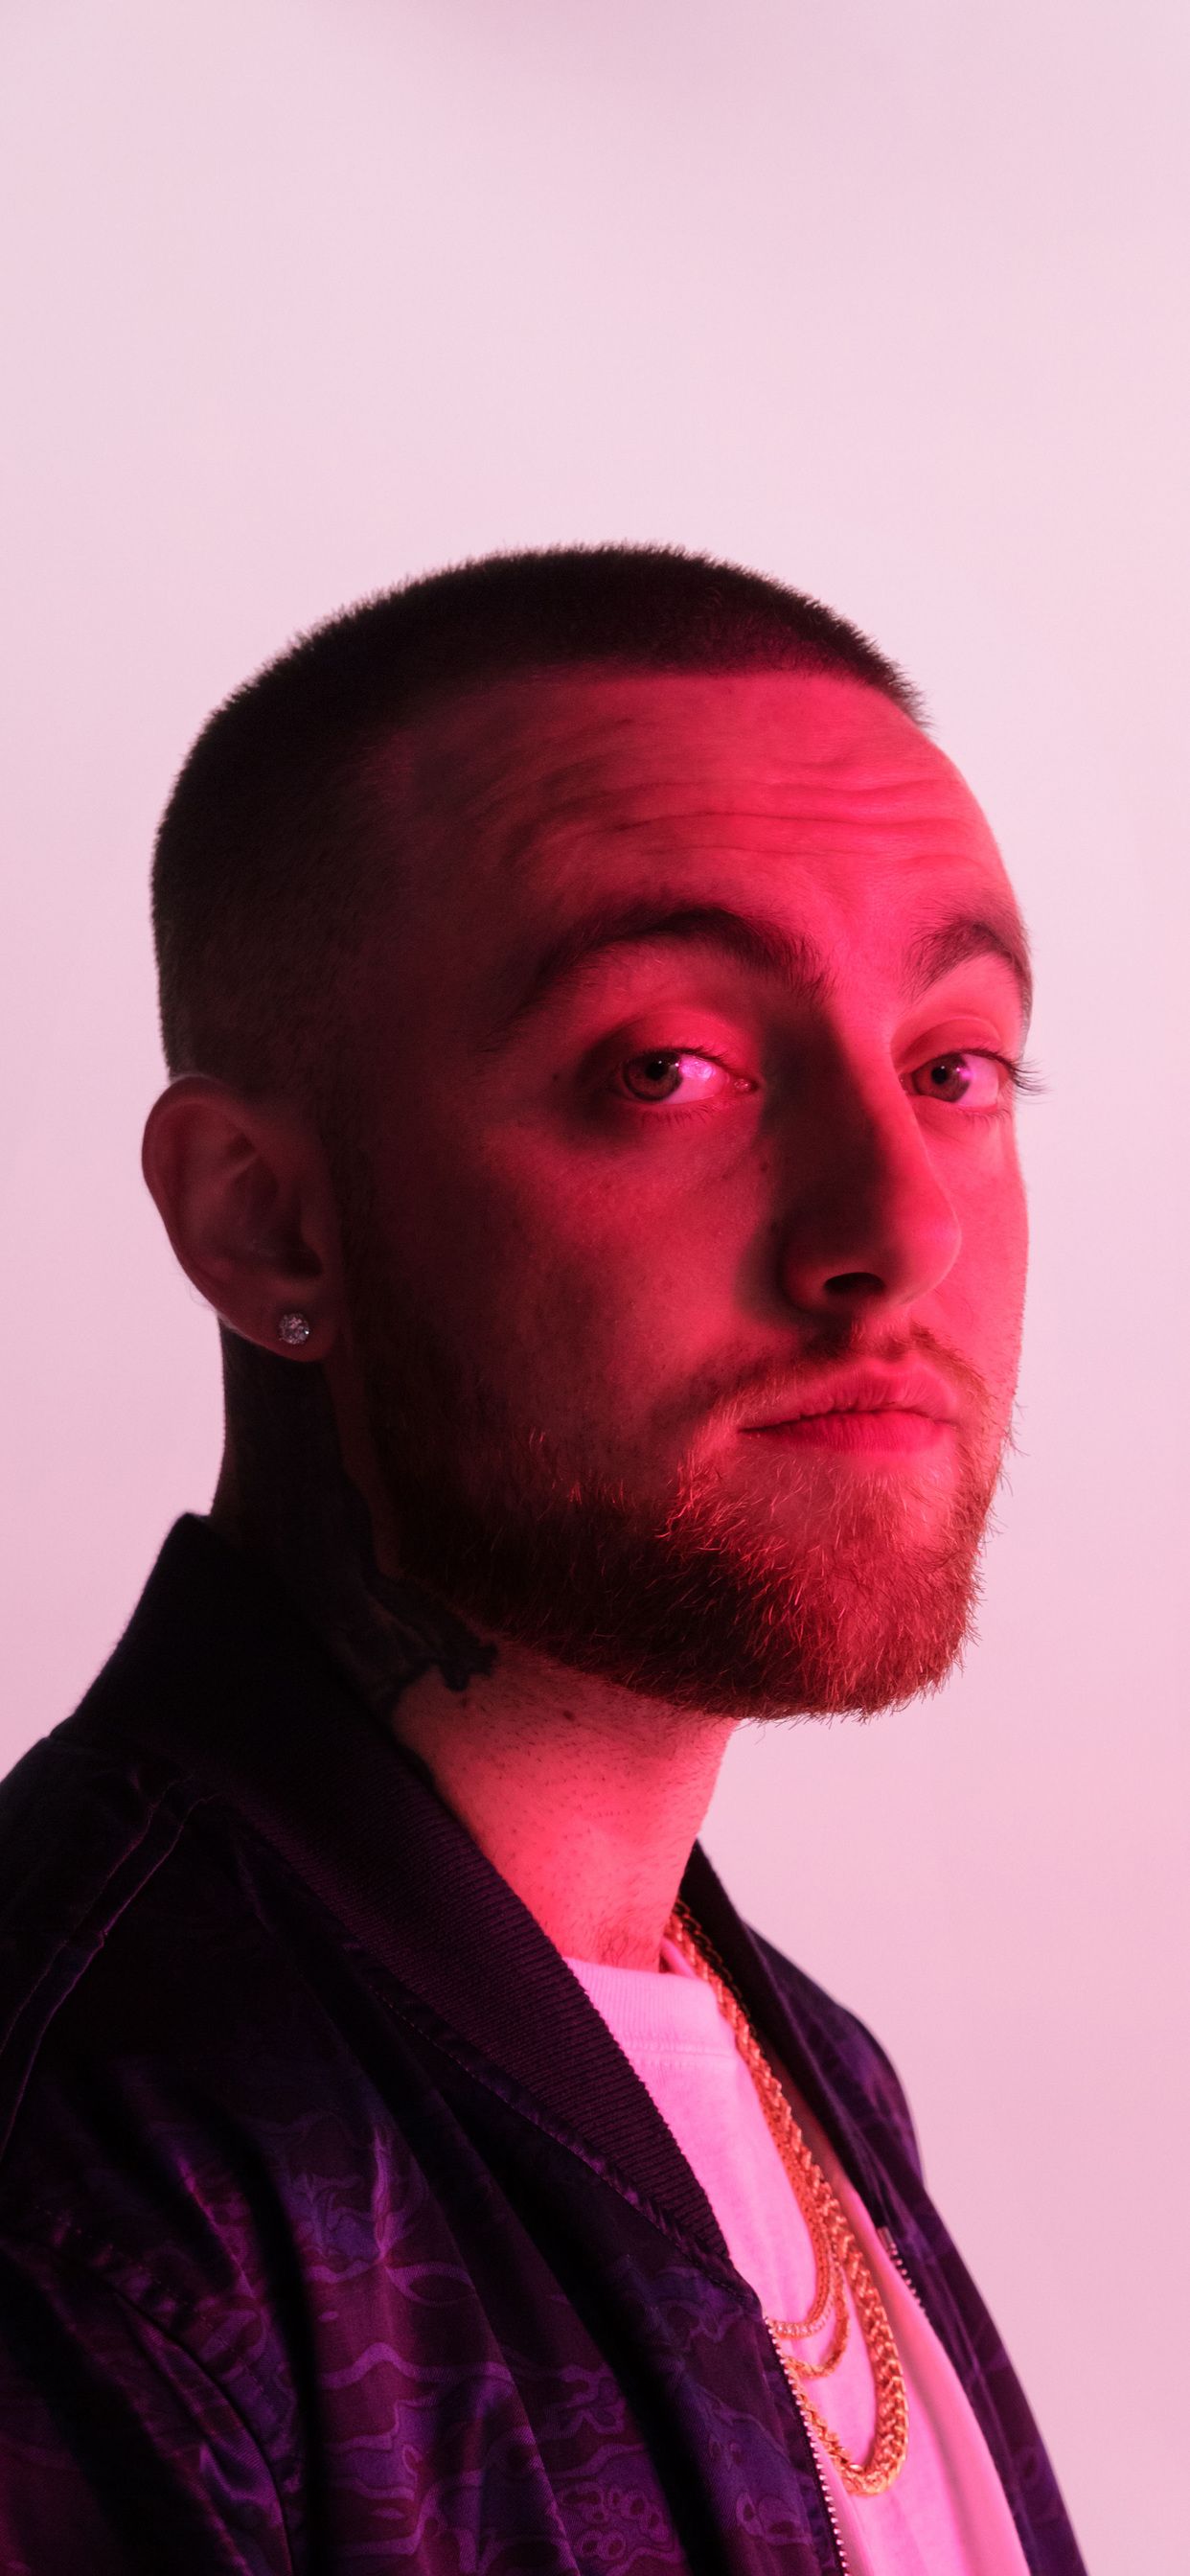 Mac Miller Wallpaper Discover more Android Background cool Desktop  Iphone wallpapers httpswwwenjpgcommacmille  Mac miller Wallpaper  Iphone wallpaper